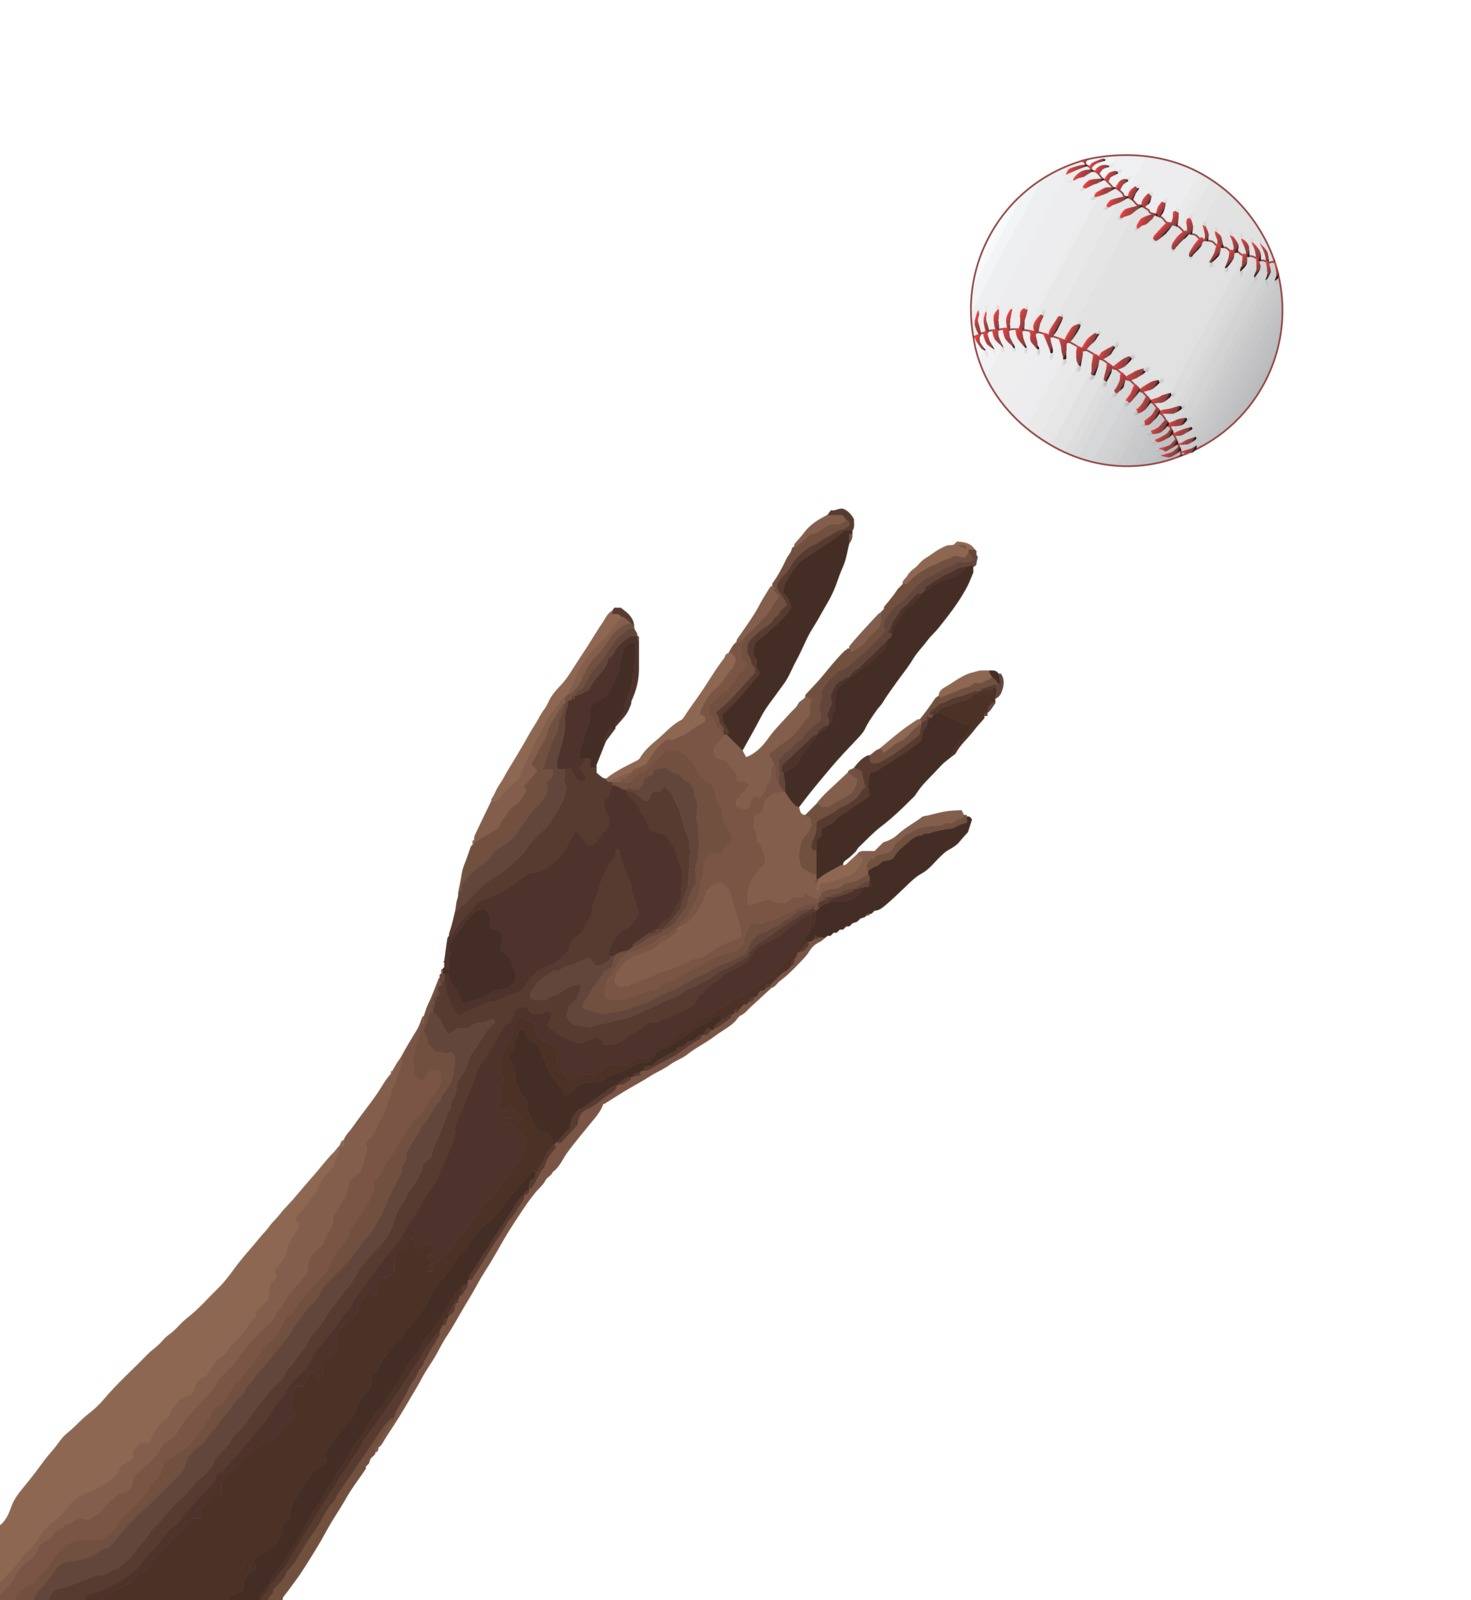 A hand catching a baseball over a white background